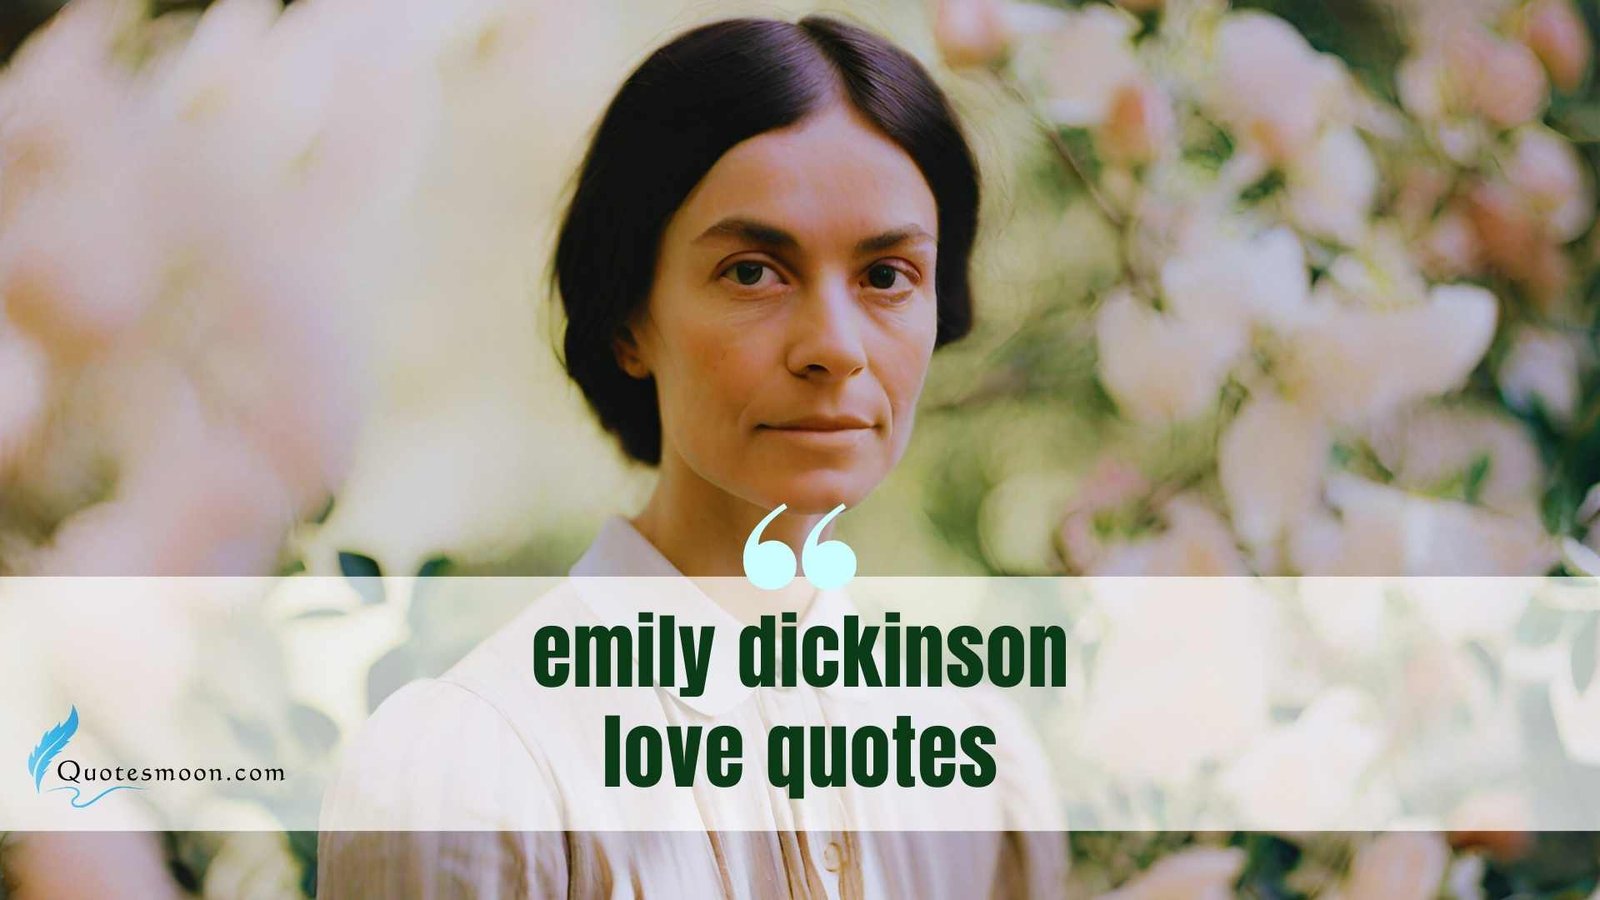 emily dickinson love quotes images